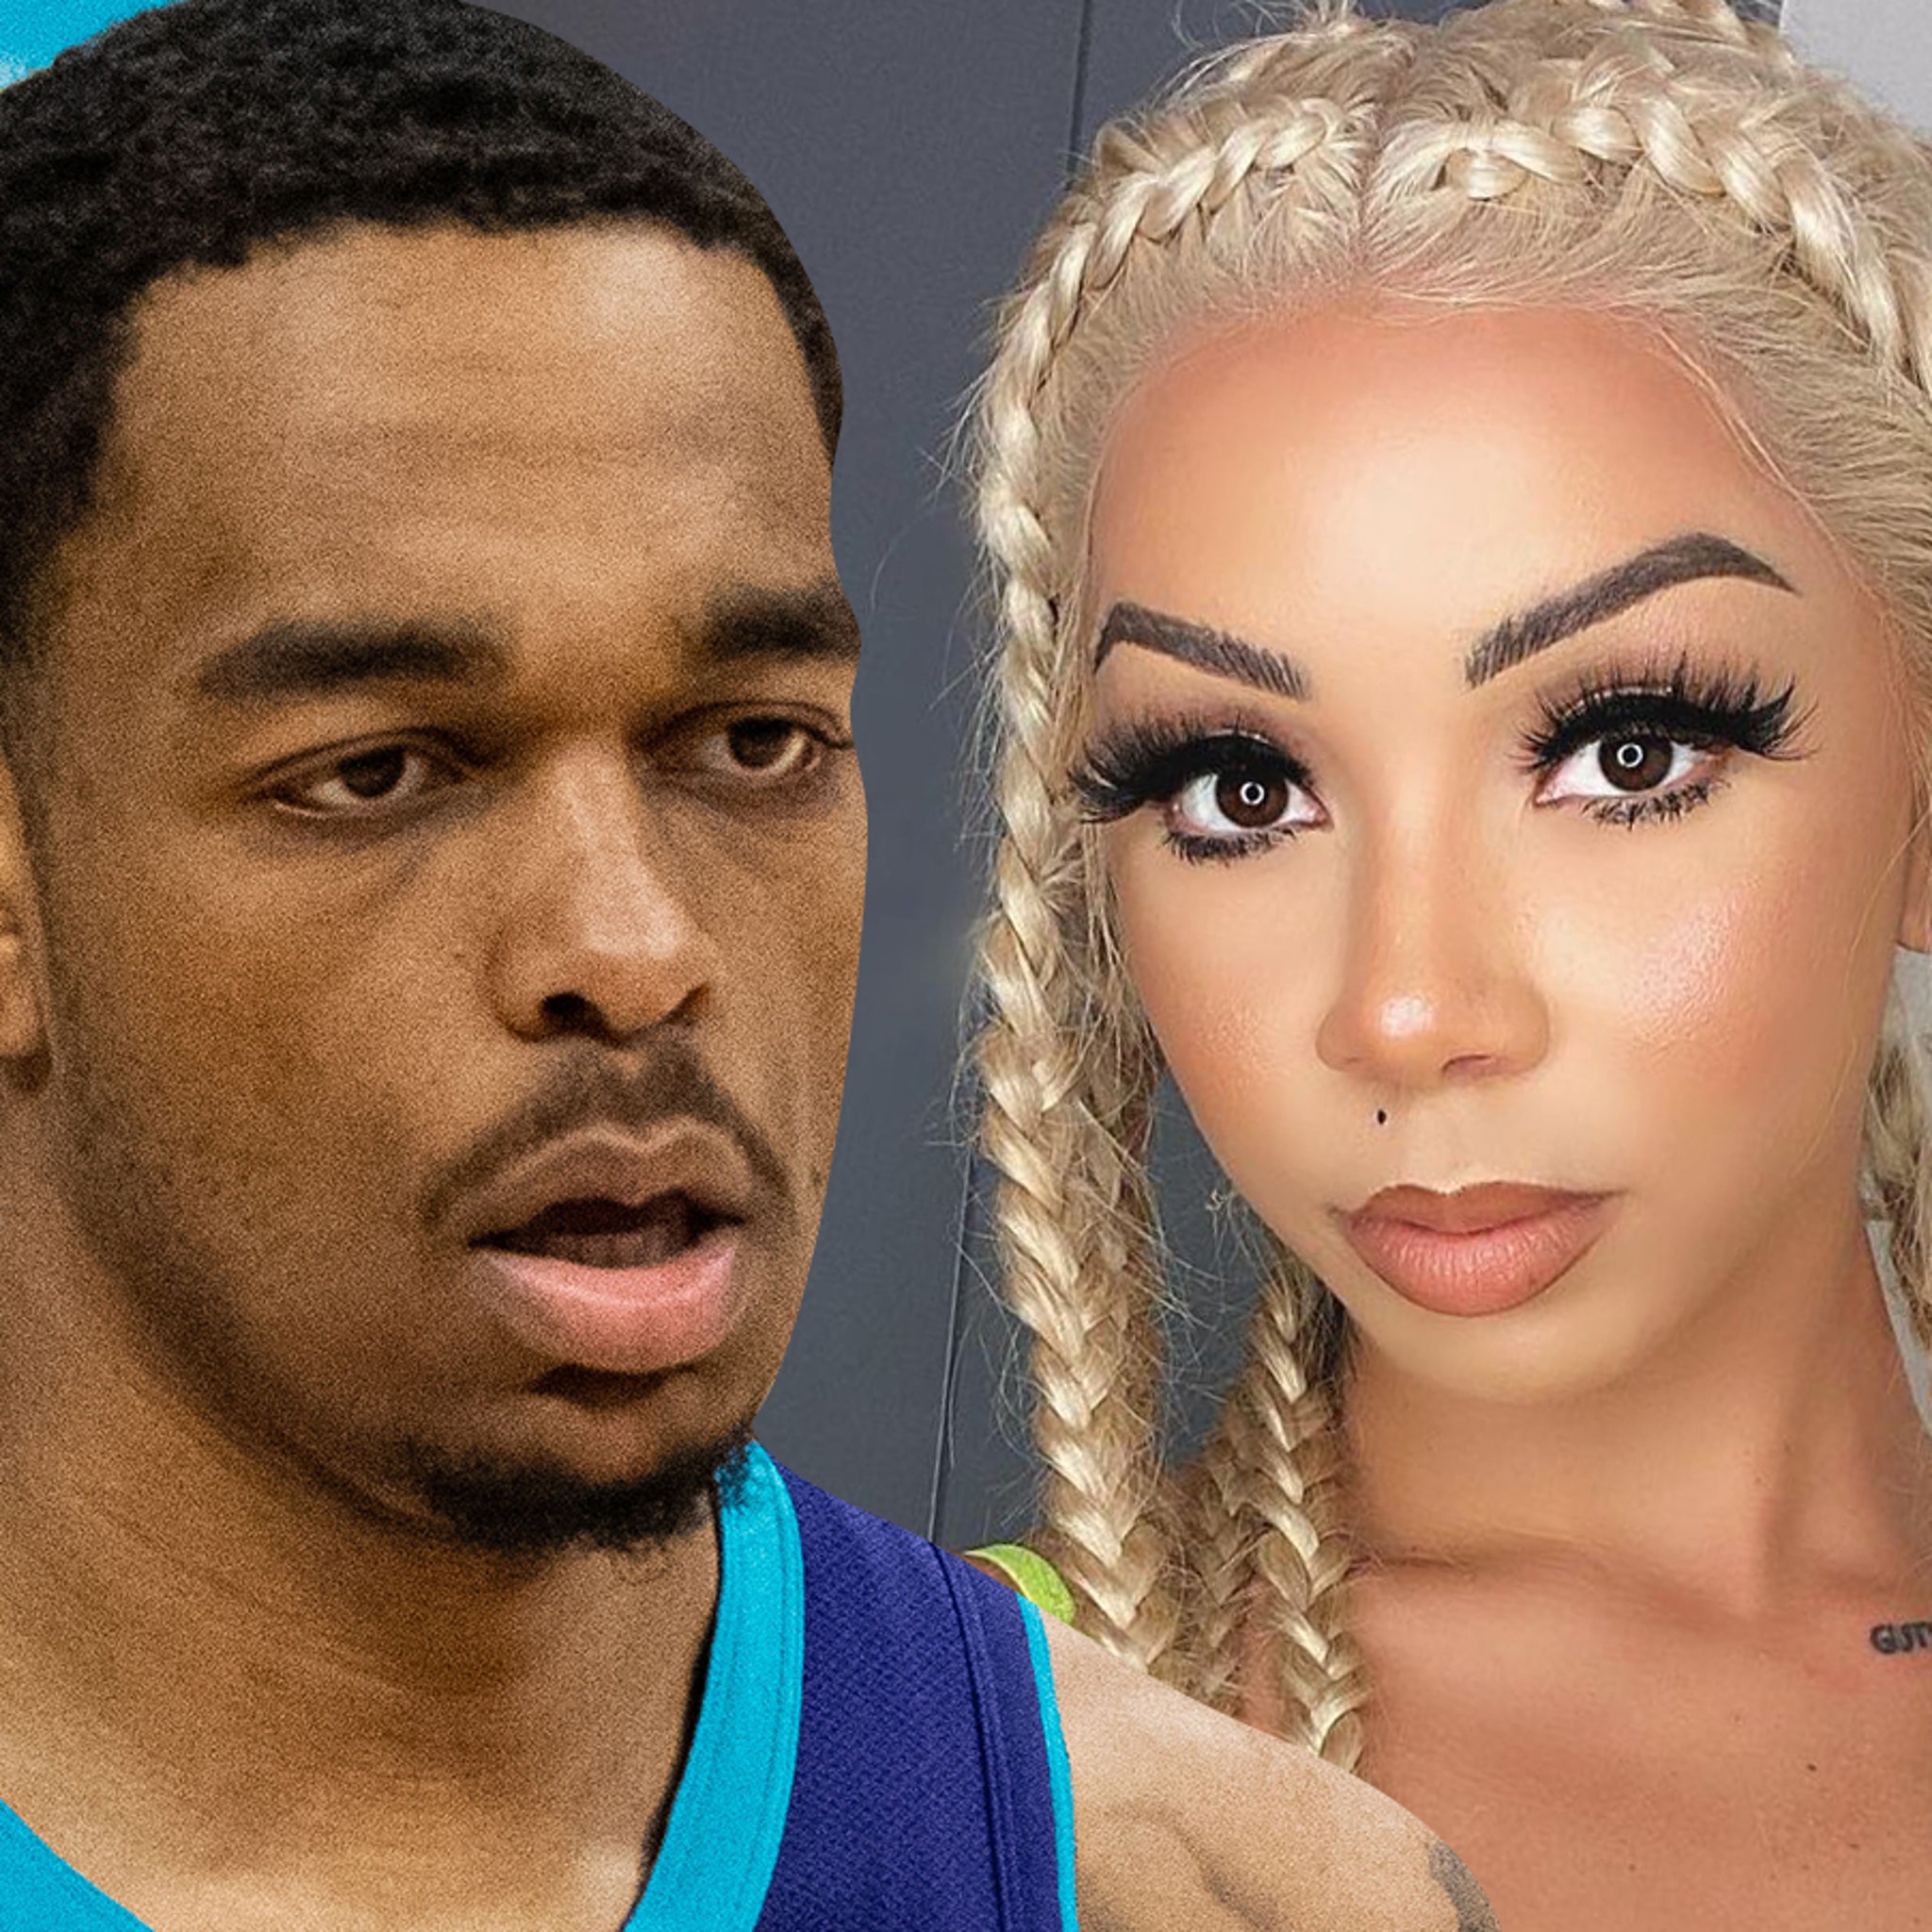 PJ Washington Calls Out Insta Model Brittany Renner For 'Faking